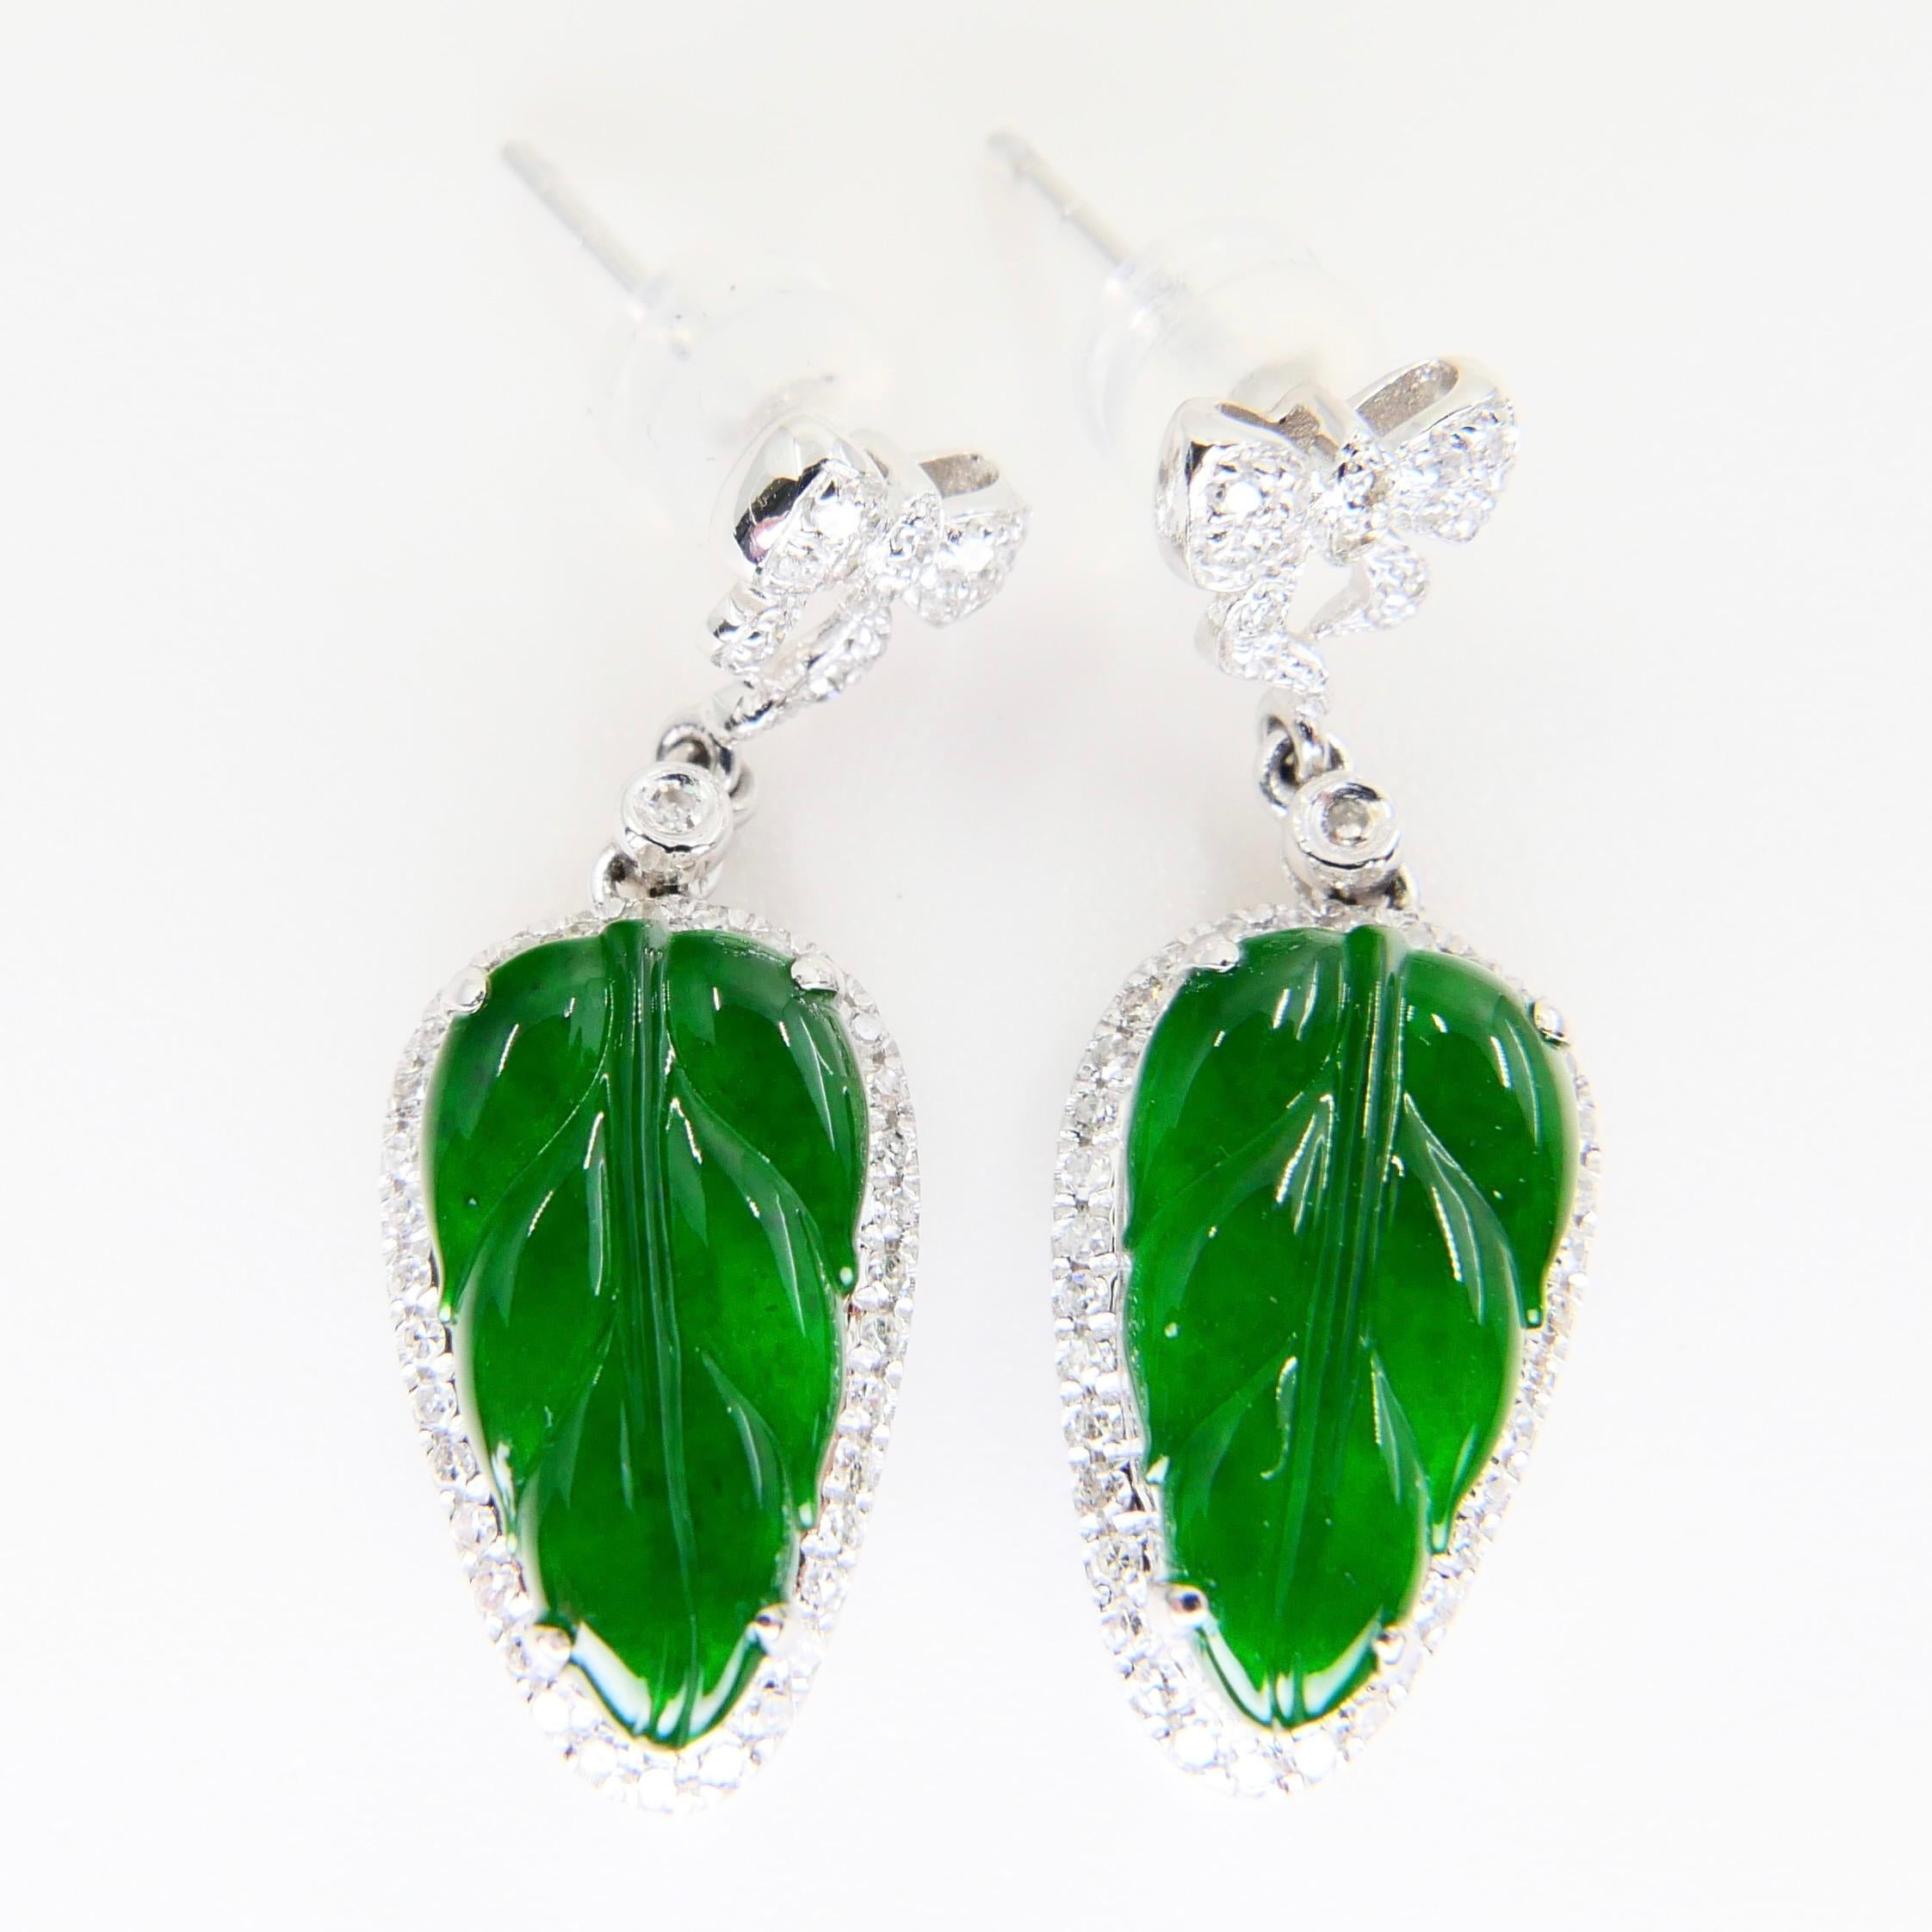 Certified Icy Imperial Green Jade & Diamond Earrings, Collector's Quality For Sale 1